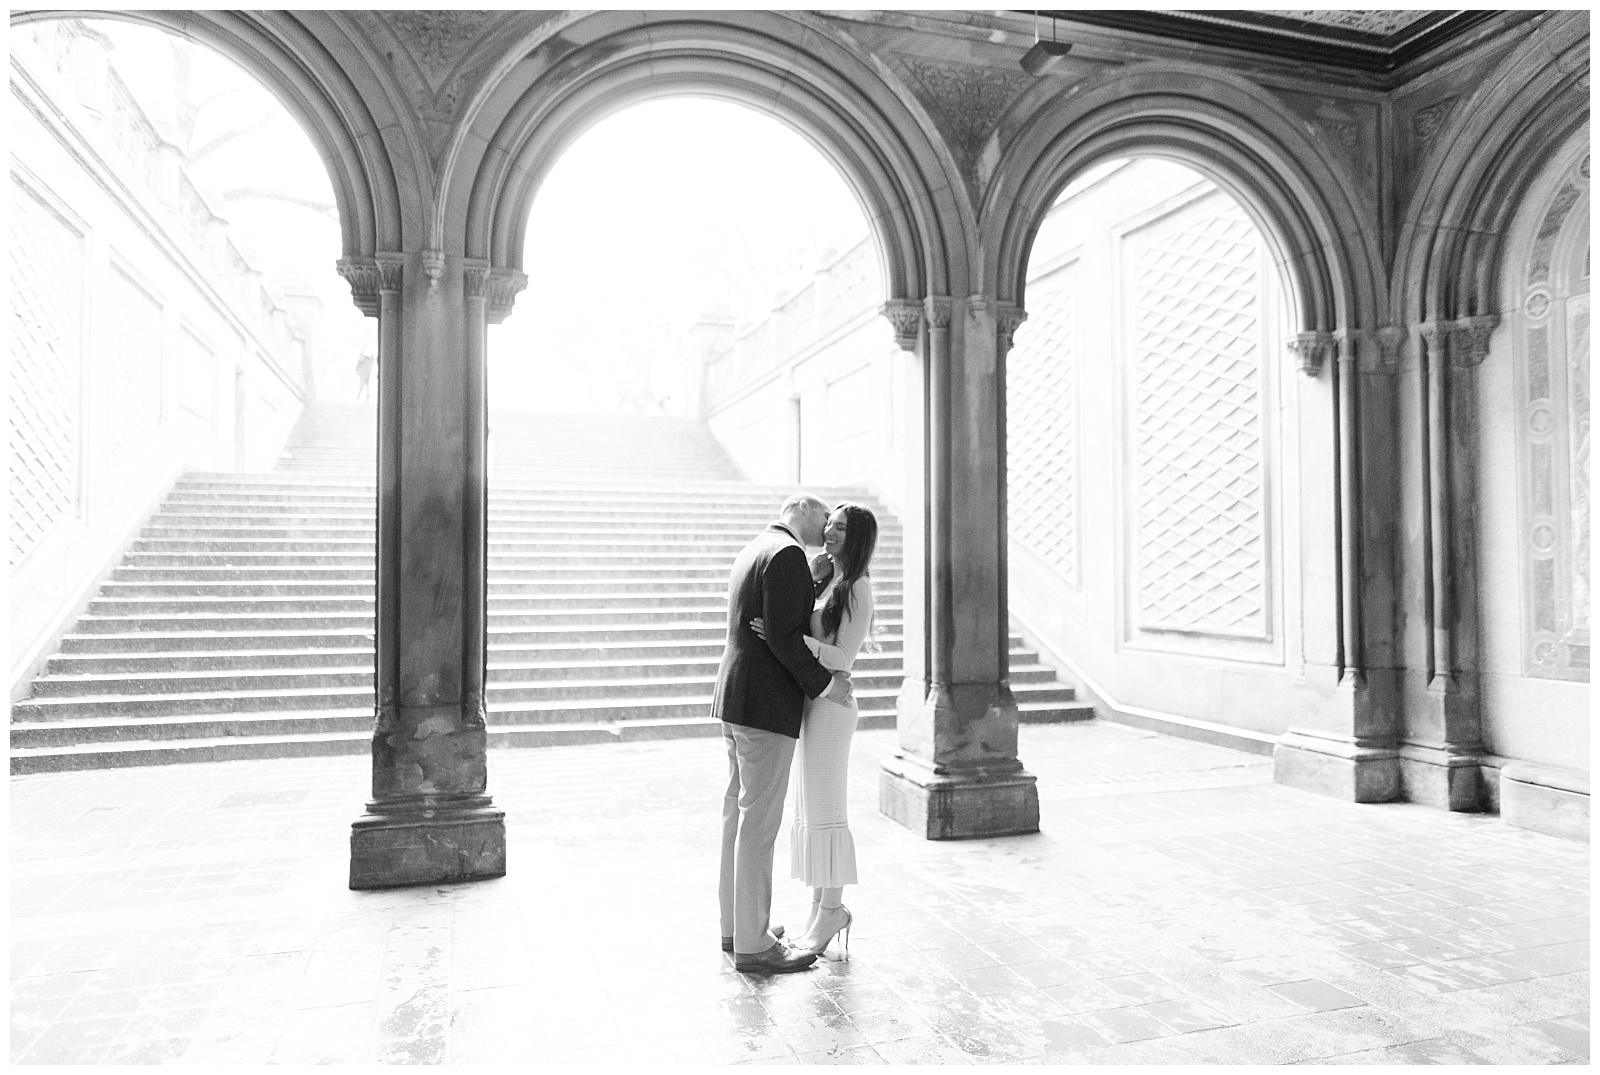 A couple shares a quiet moment alone in Bethesda Terrace.